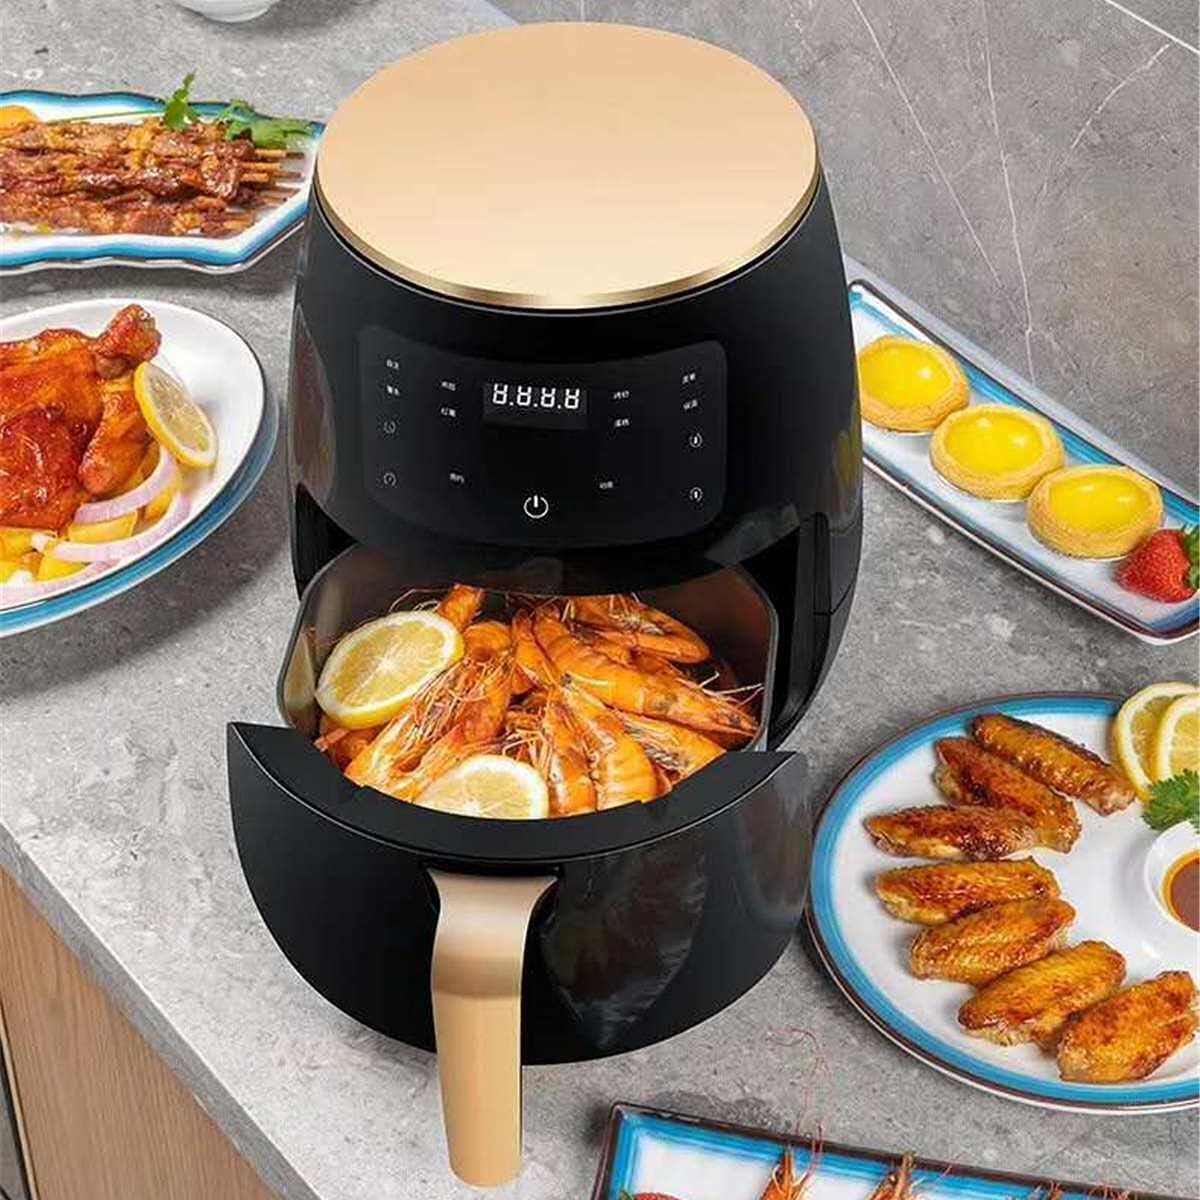 Air Fryer 6L Capacity - Oven / Cooker for Healthy Low Fat Cooking - Fully Adjustable Timer and Temperature (Black)